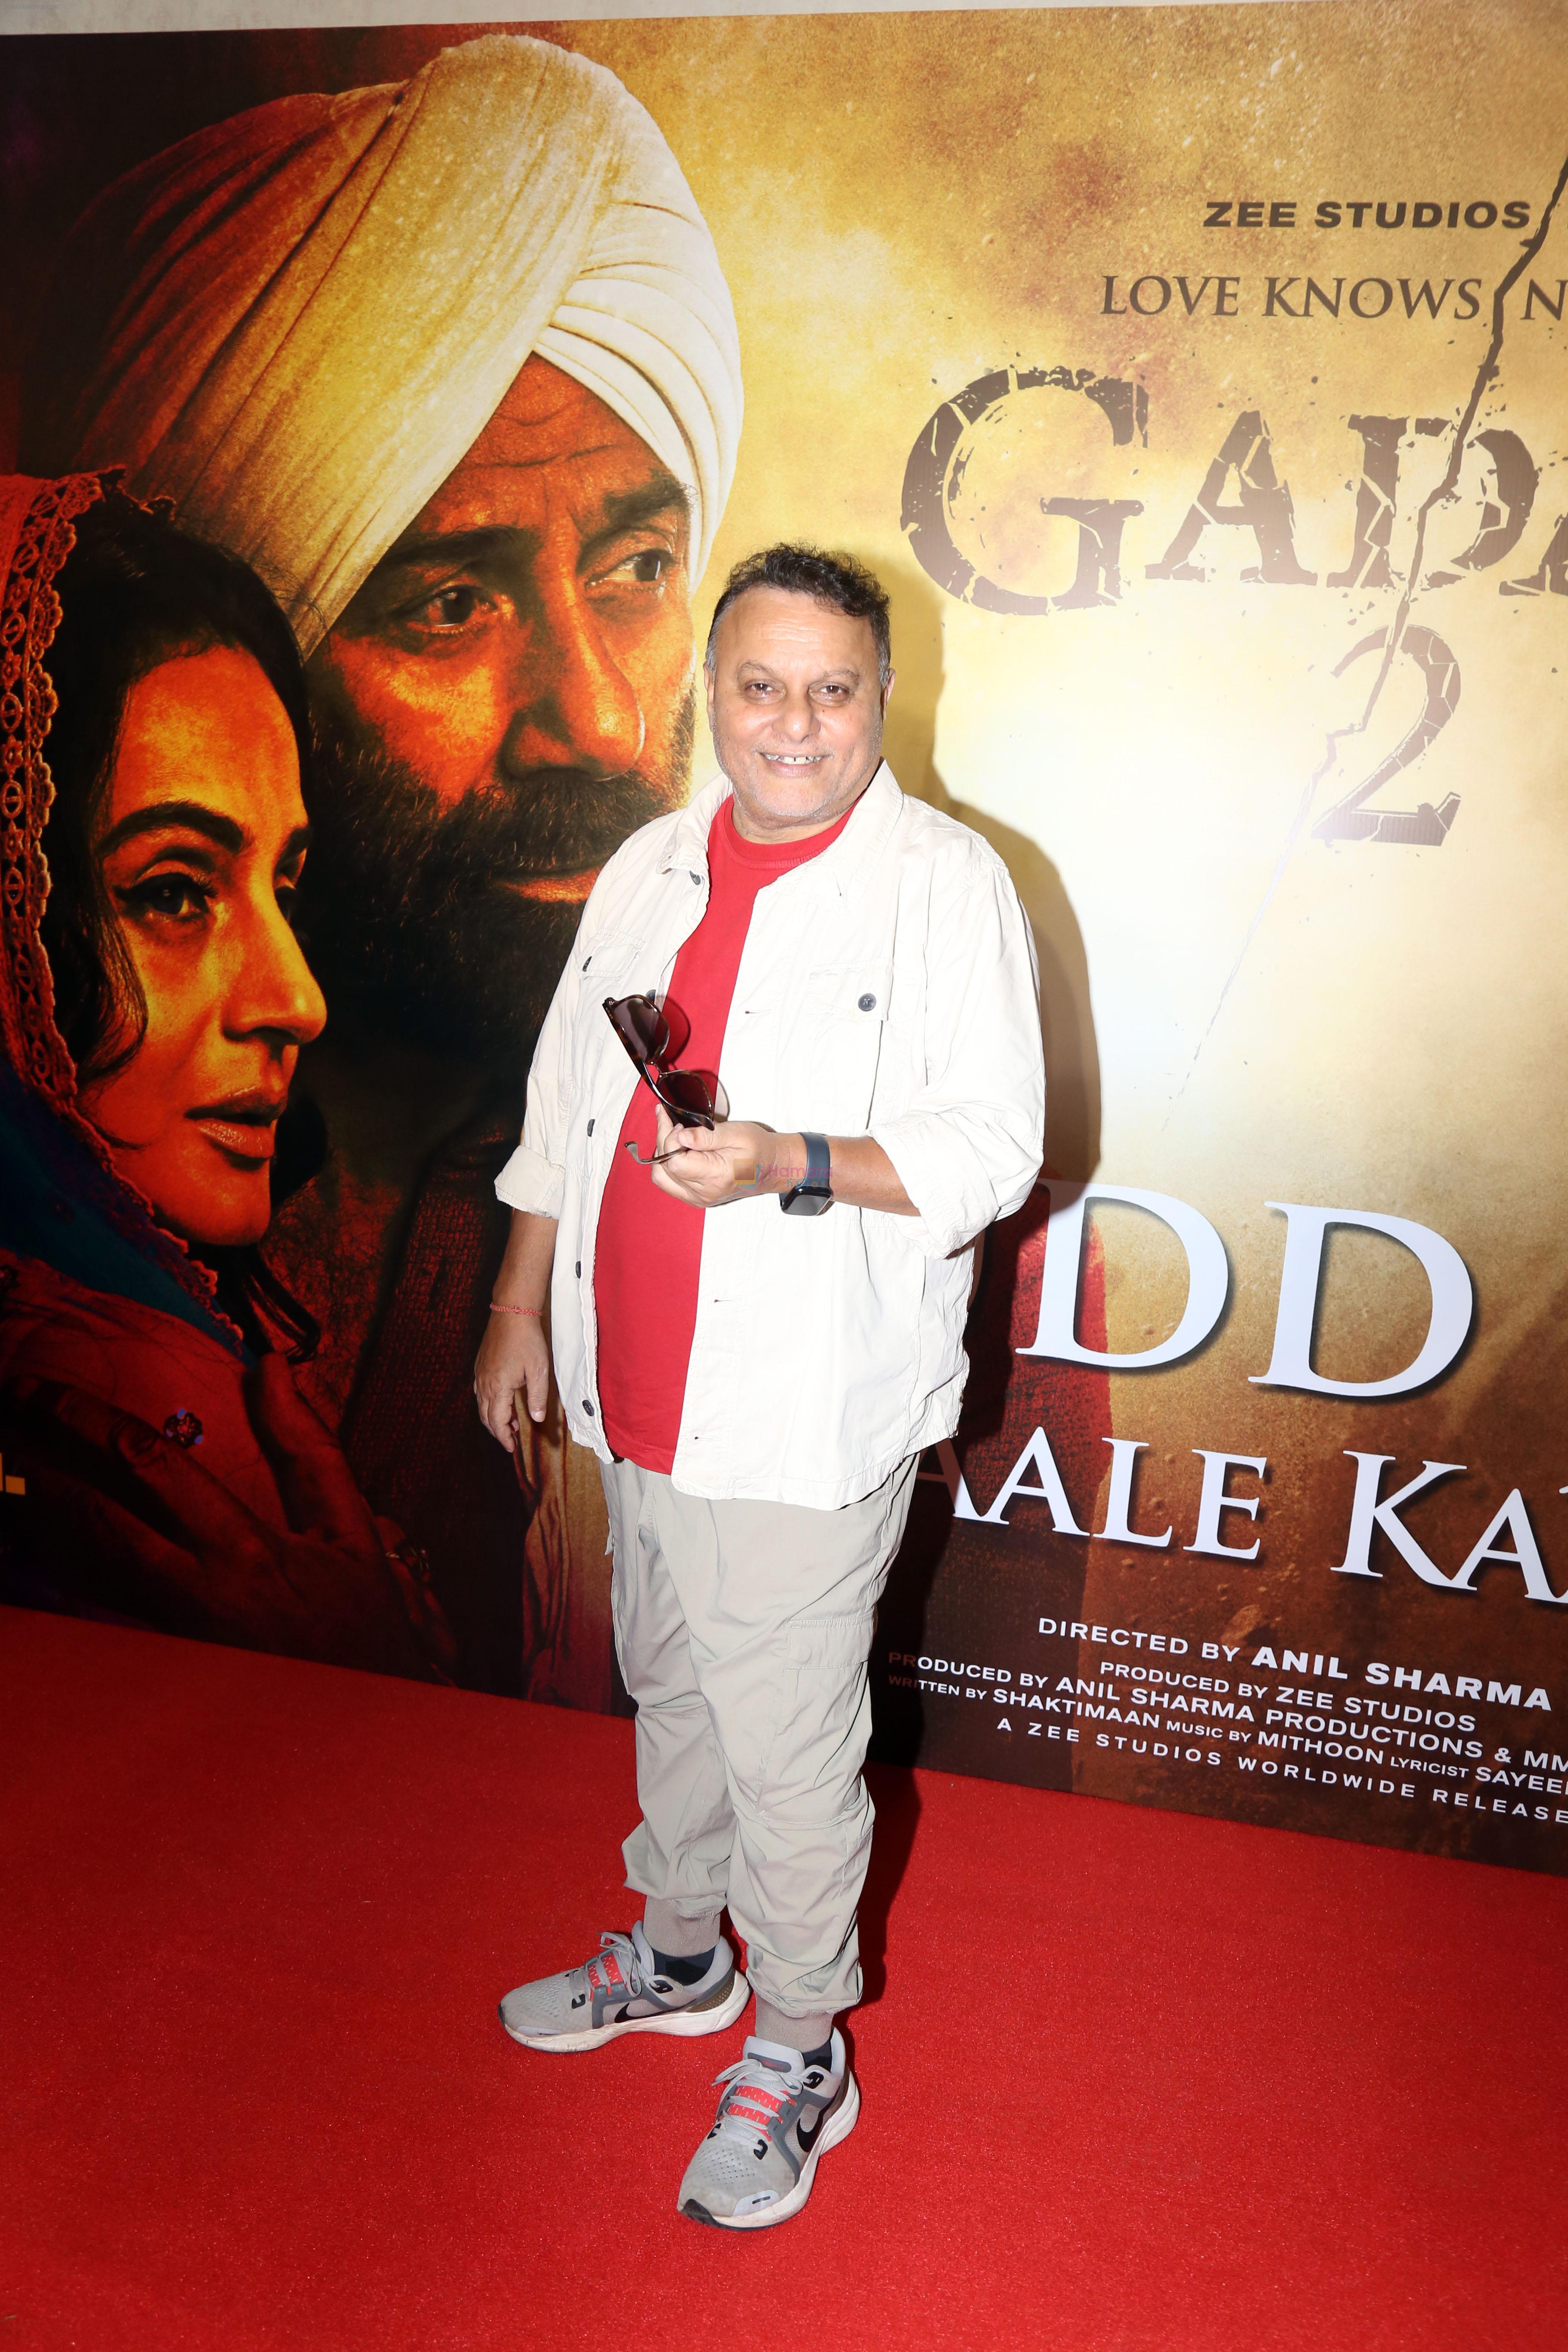 Anil Sharma at the Press Conference Of film Gadar 2 first Song Udd Jaa Kaale Kaava on 5 July 2023